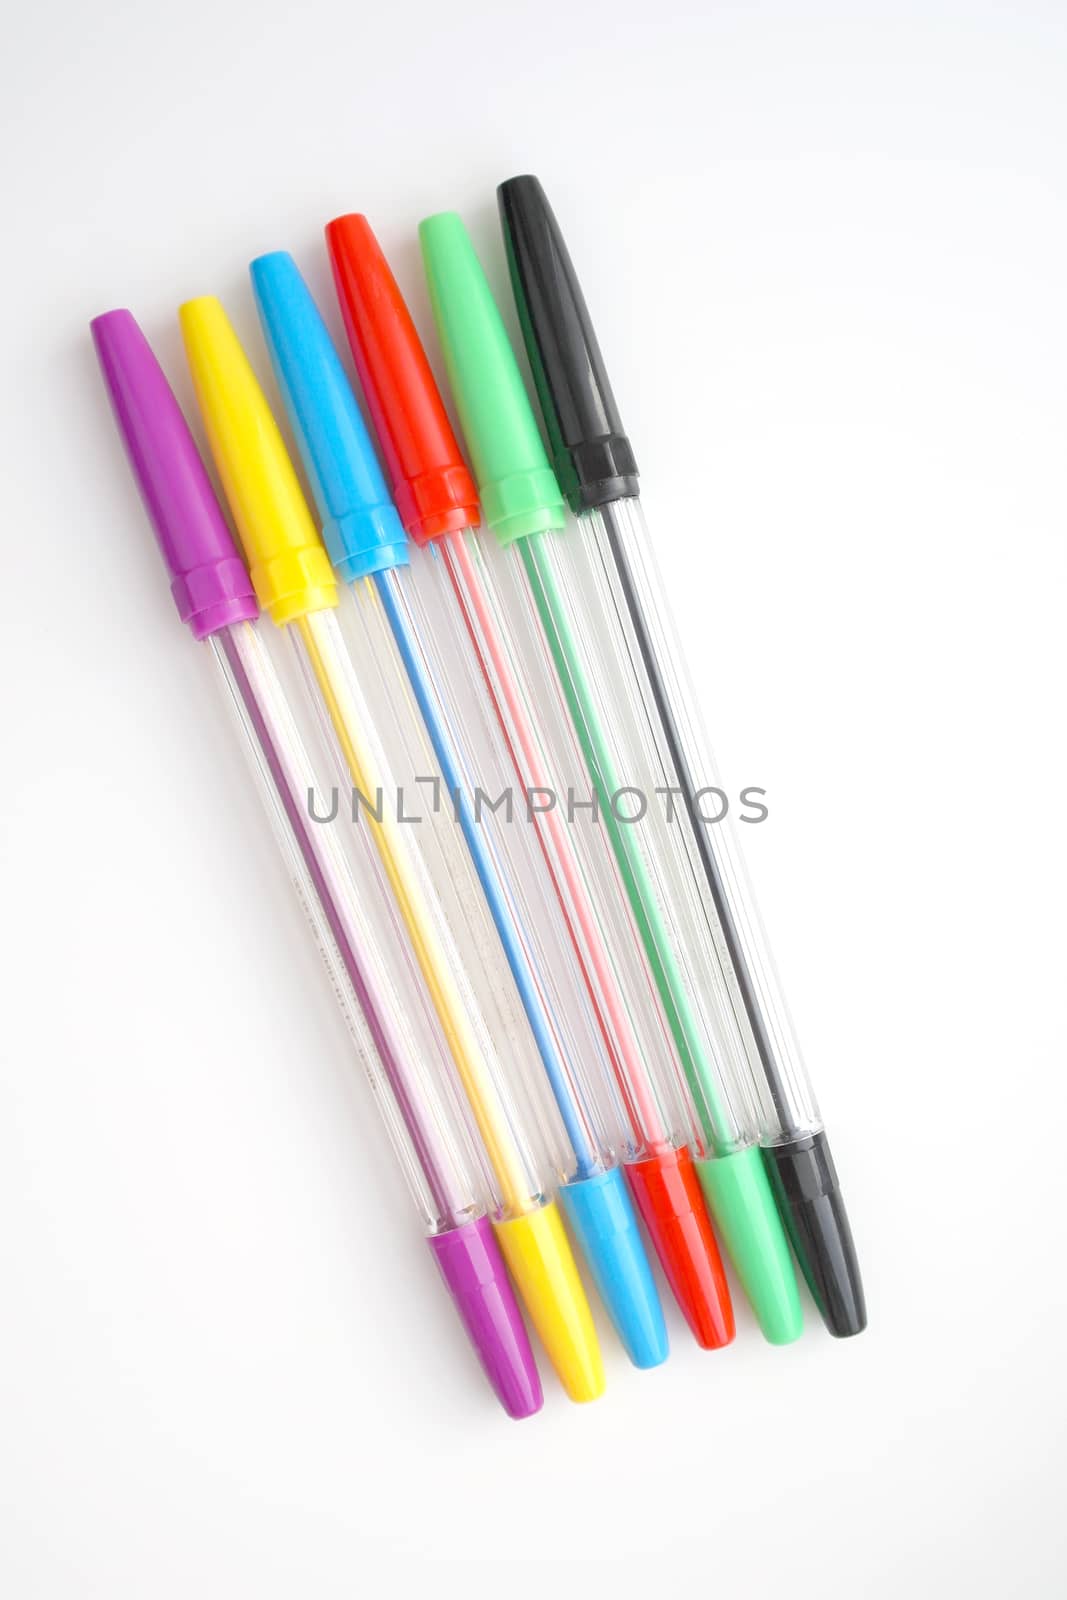 Collection of ball-point pen over white